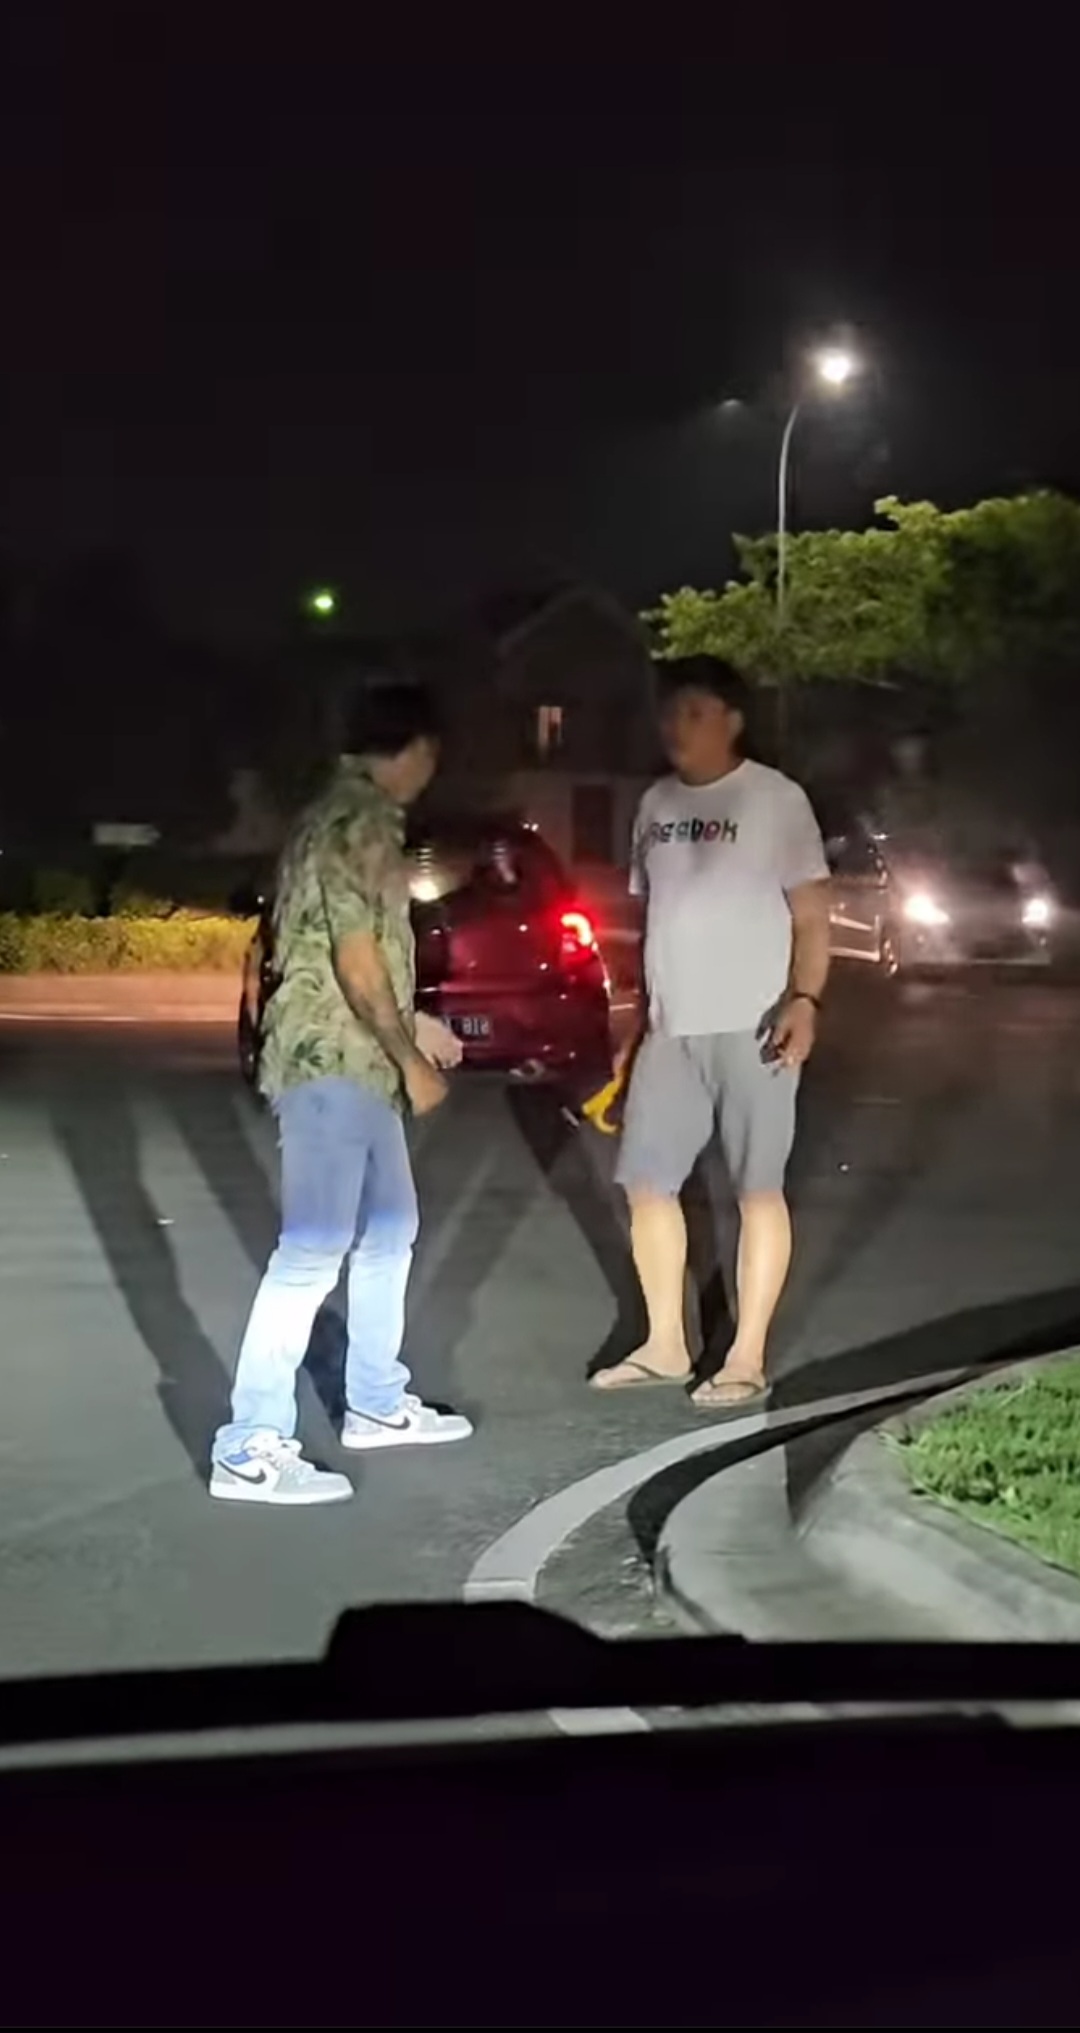 Viral Reckless Driver Confronted by MMA Athlete